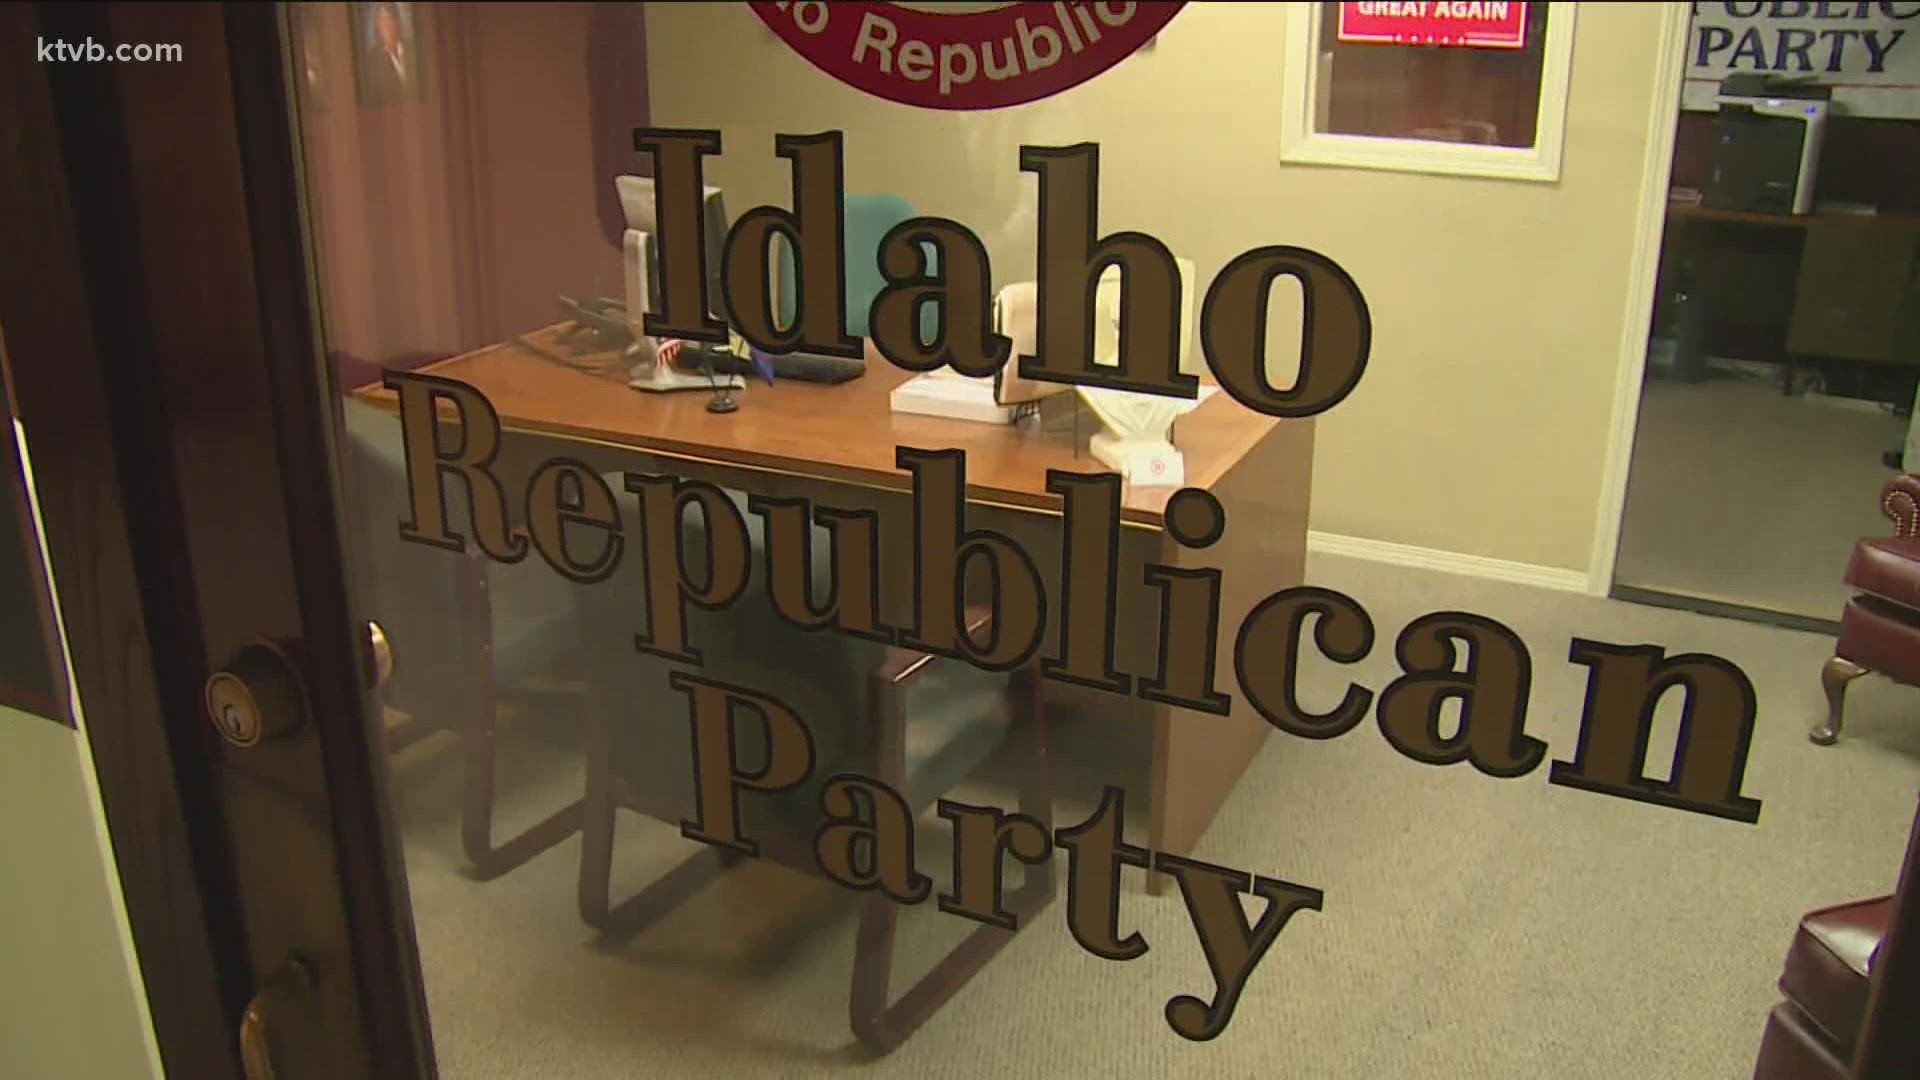 Judge Jason Scott ruled in favor of the Idaho Republican Party on Friday, after the party accused the BCRCC of violating election laws and party rules.